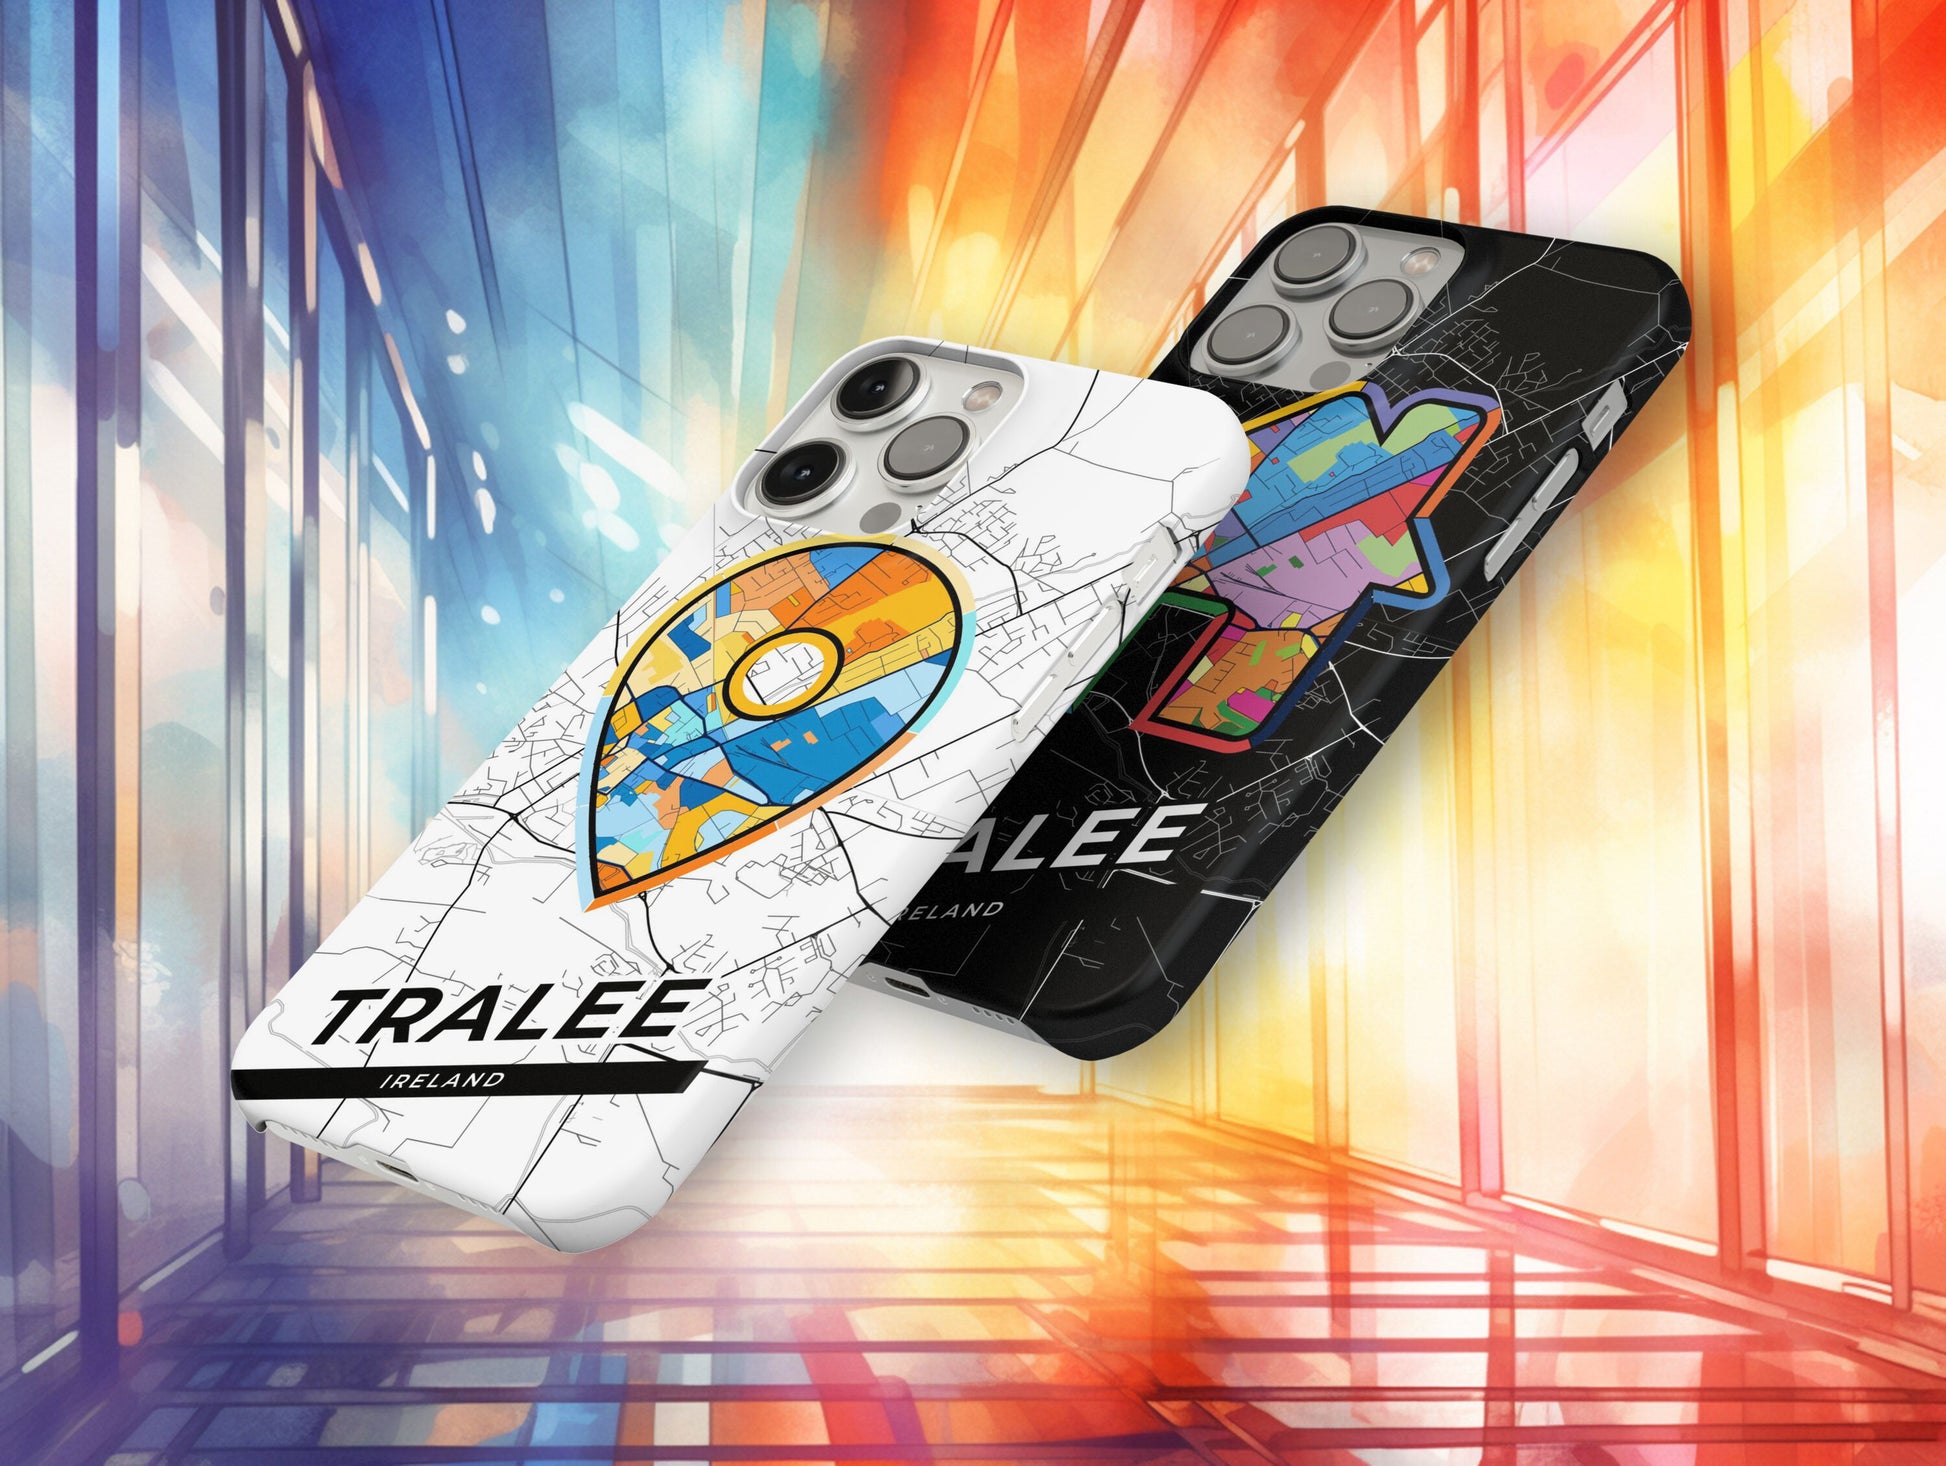 Tralee Ireland slim phone case with colorful icon